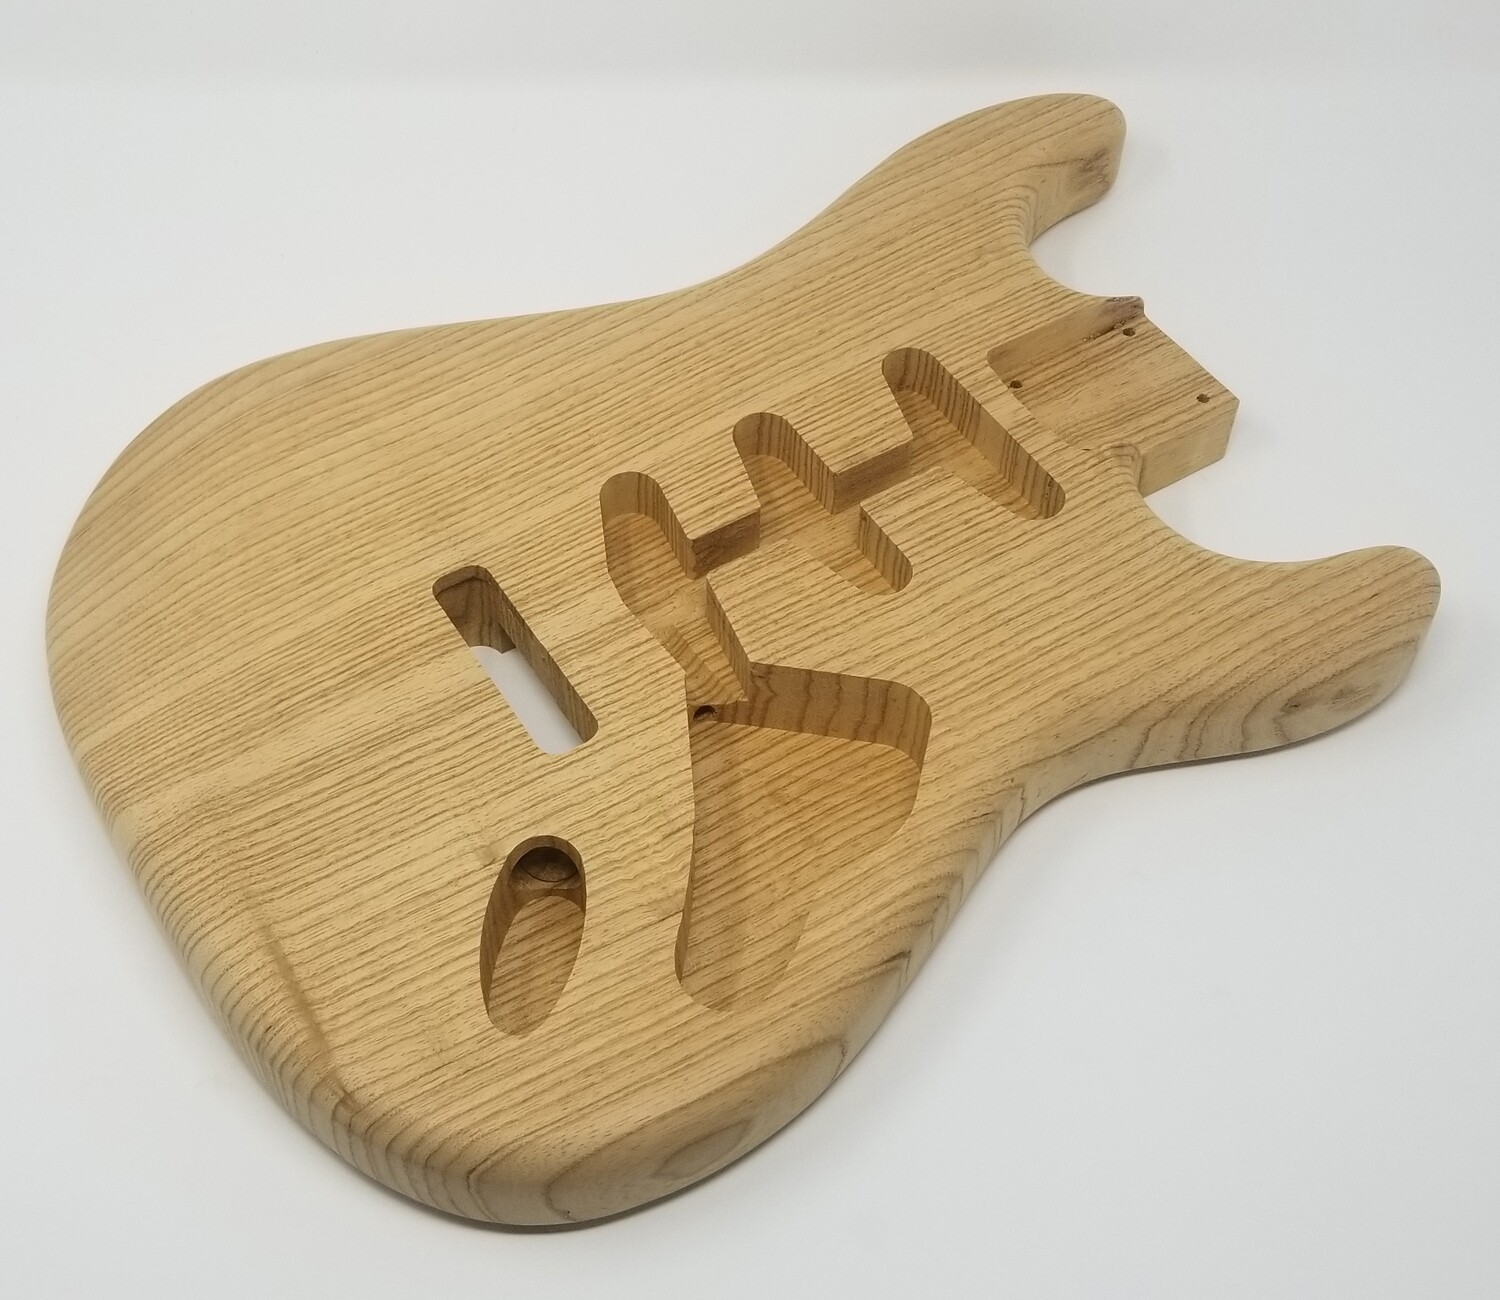 Carparelli Very Light, 3.2lbs, Roasted 2 Pc Swamp Ash Unfinished